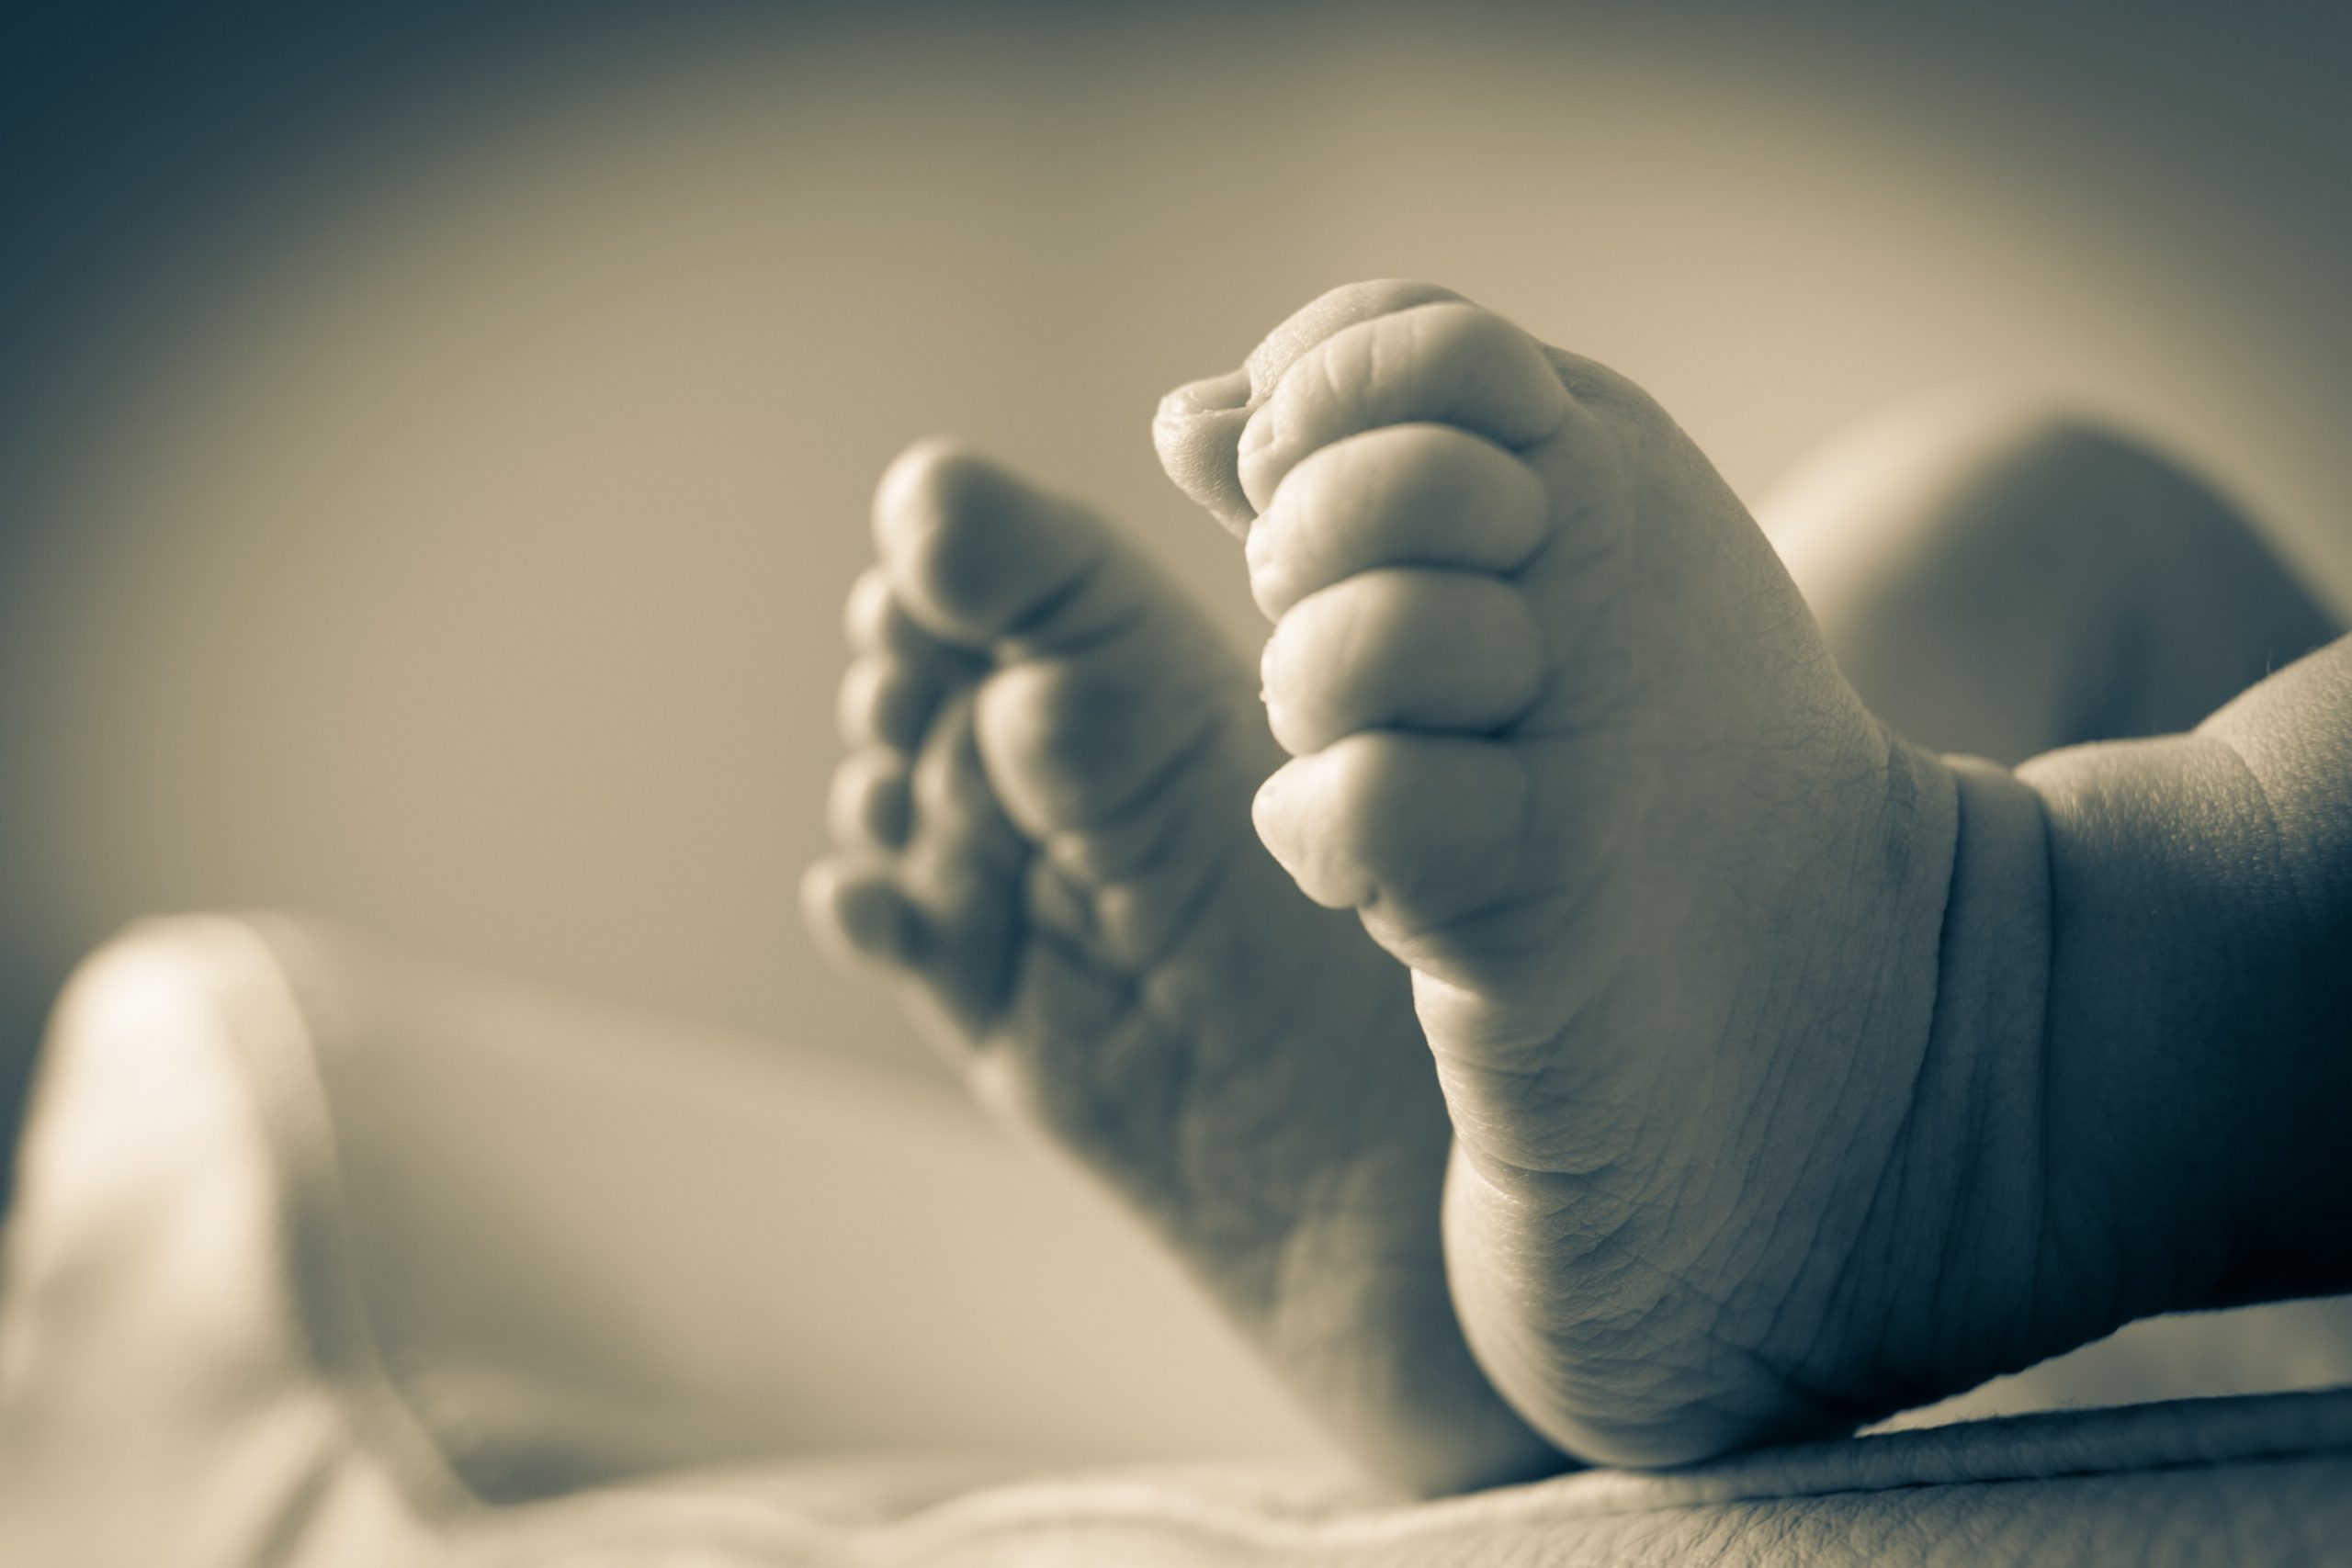 Body of baby boy found in mosque toilet cistern